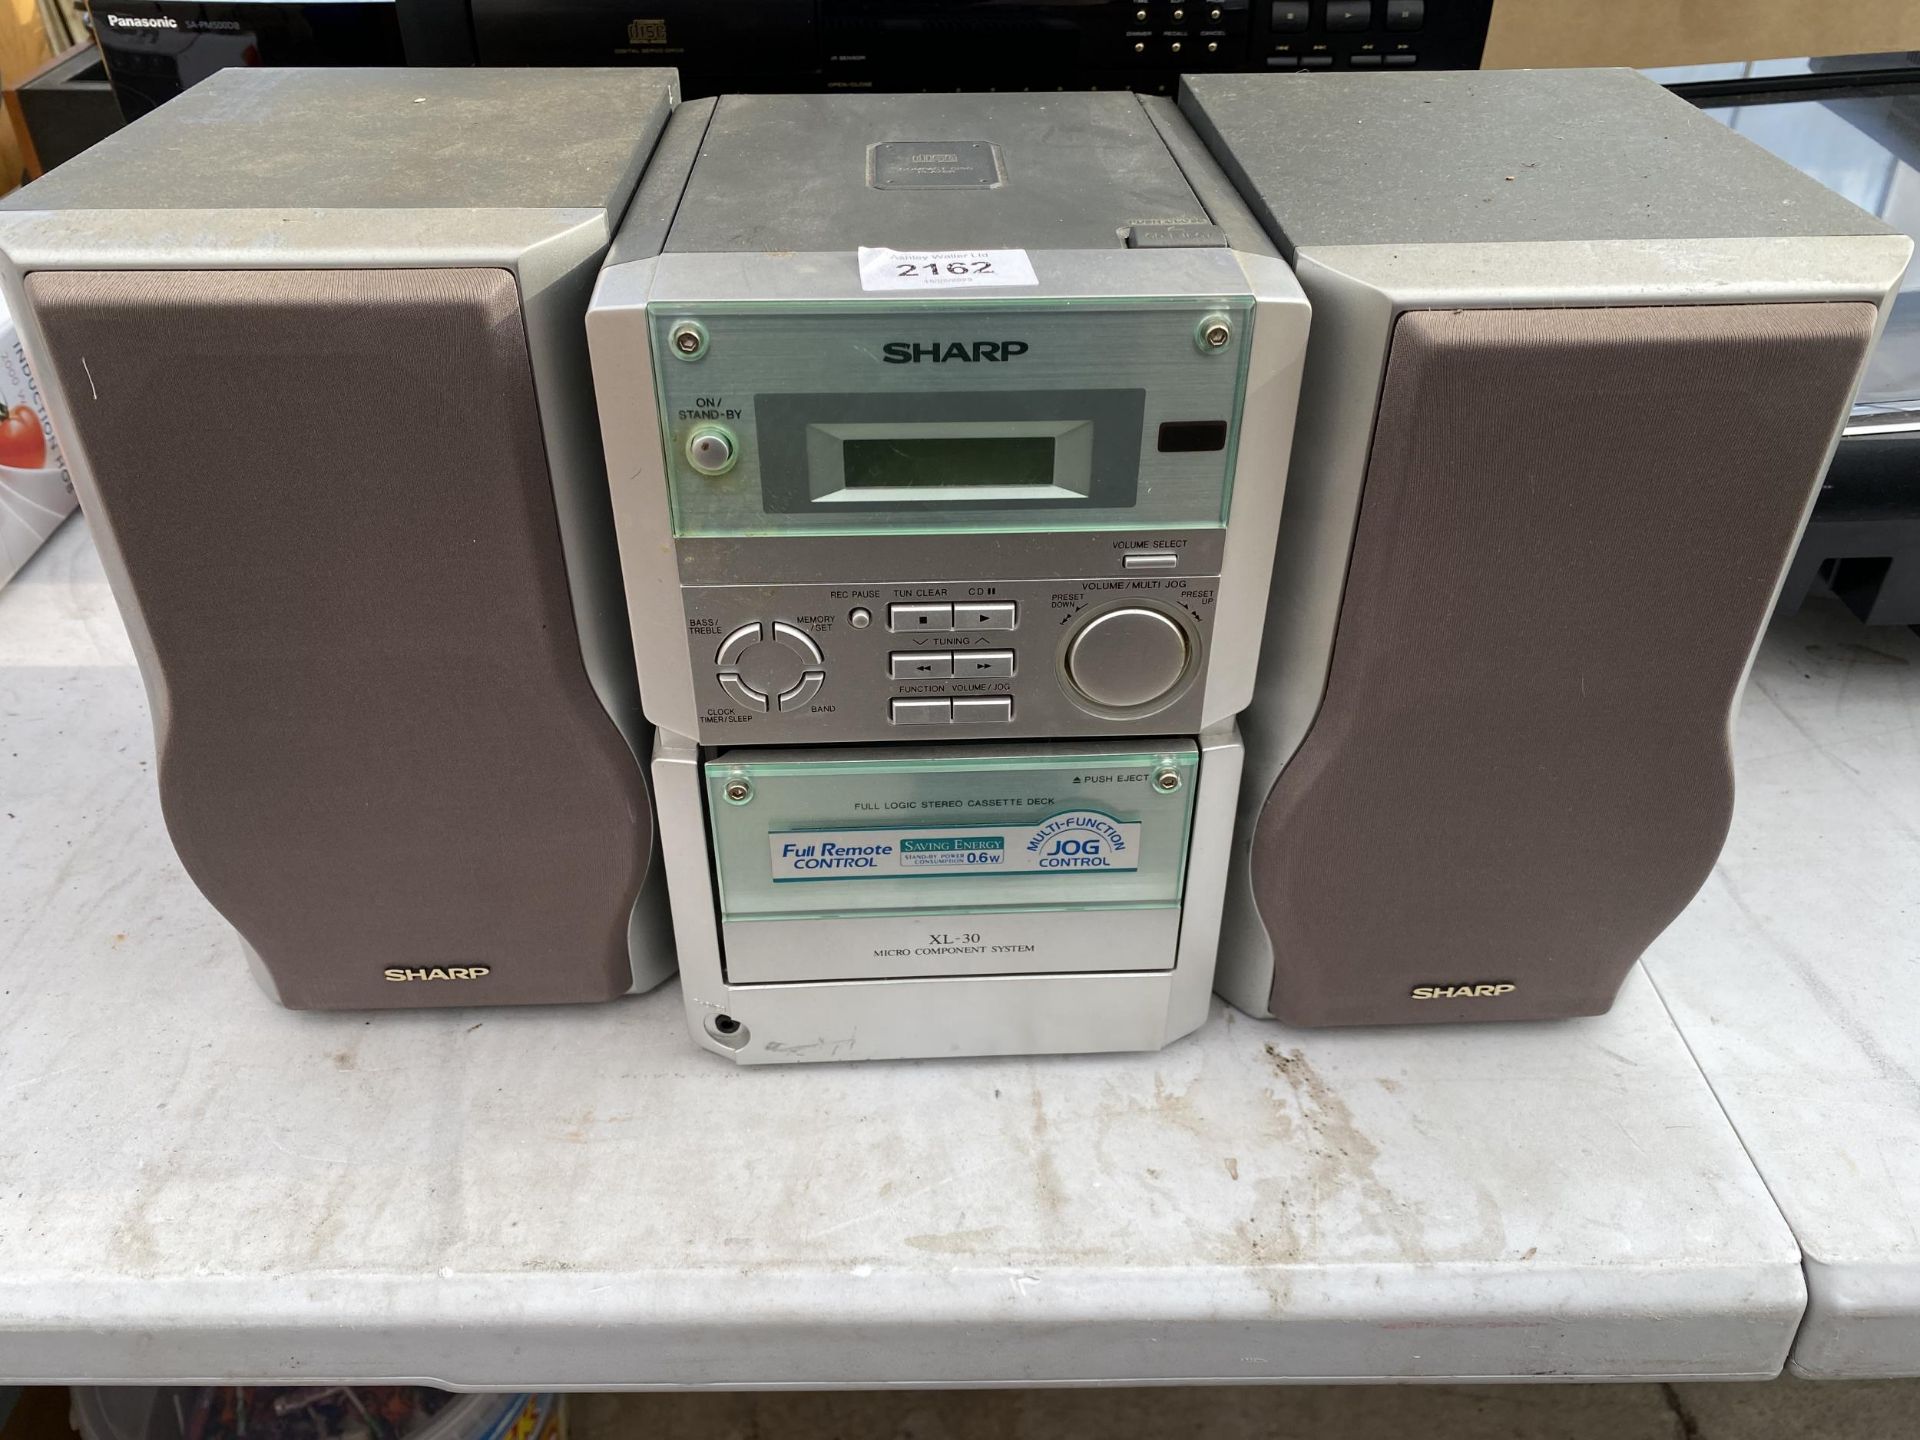 A SHARP STEREO SYSTEM WITH TWO SPEAKERS